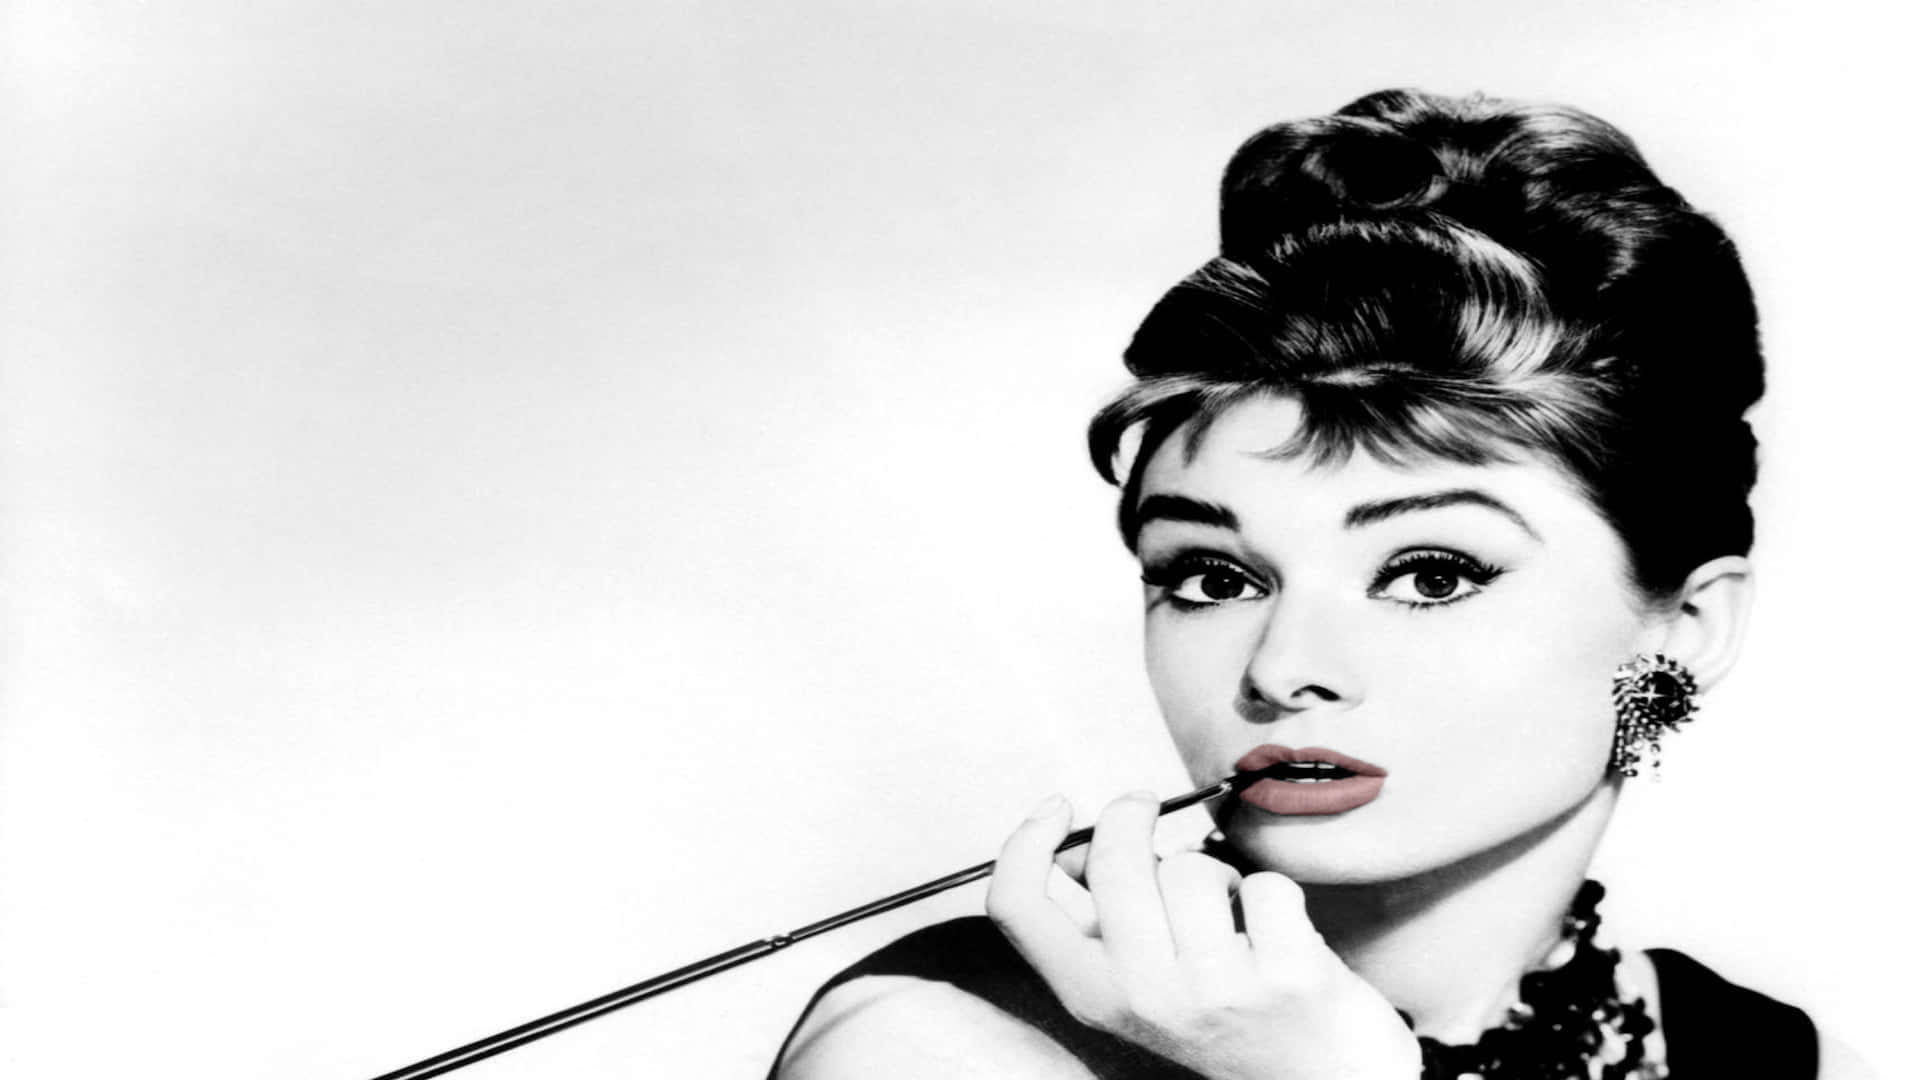 “There is beauty in everything, just not everybody can see it.” - Audrey Hepburn